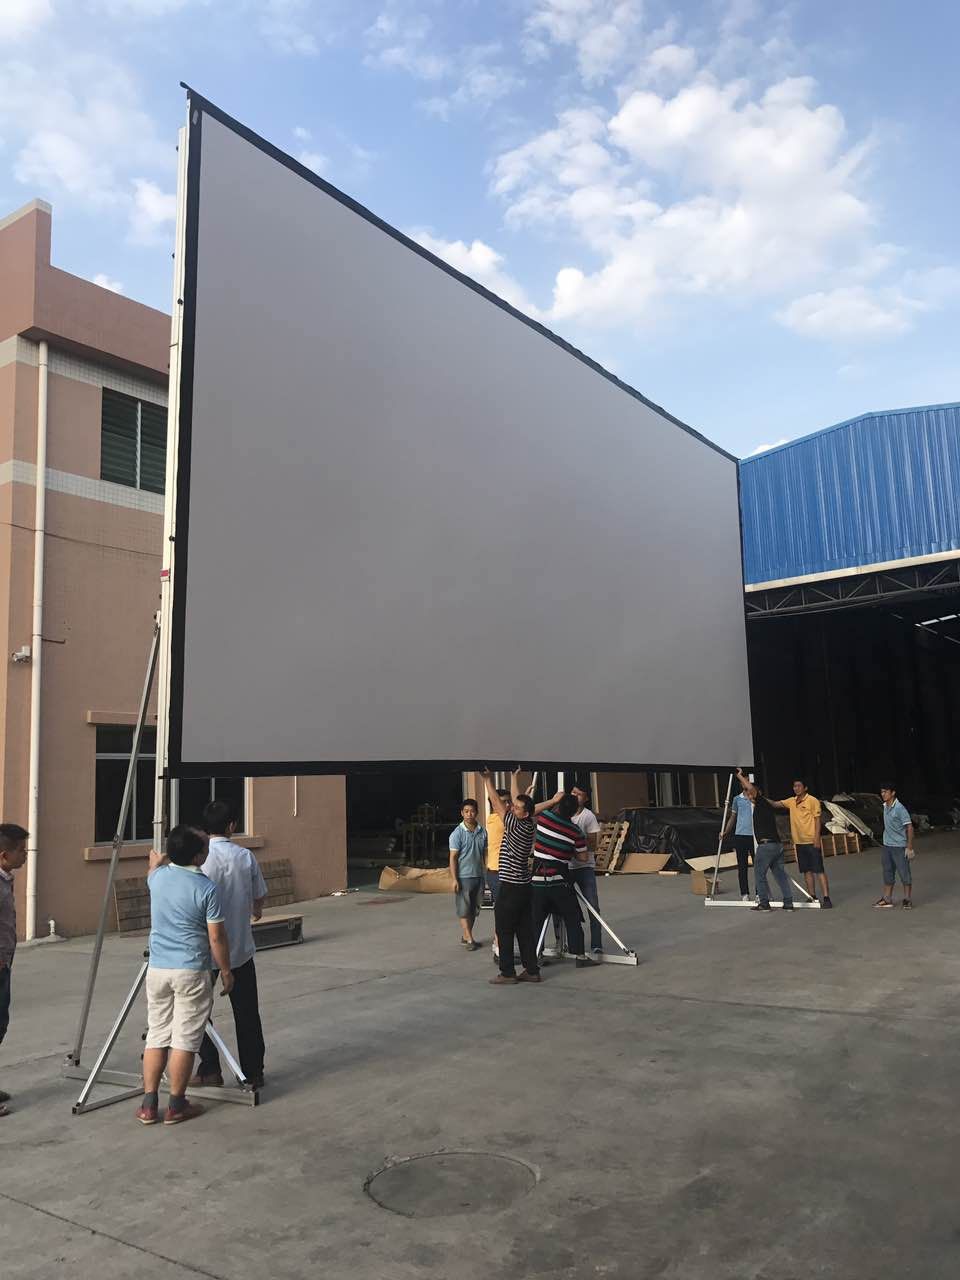 projection screens